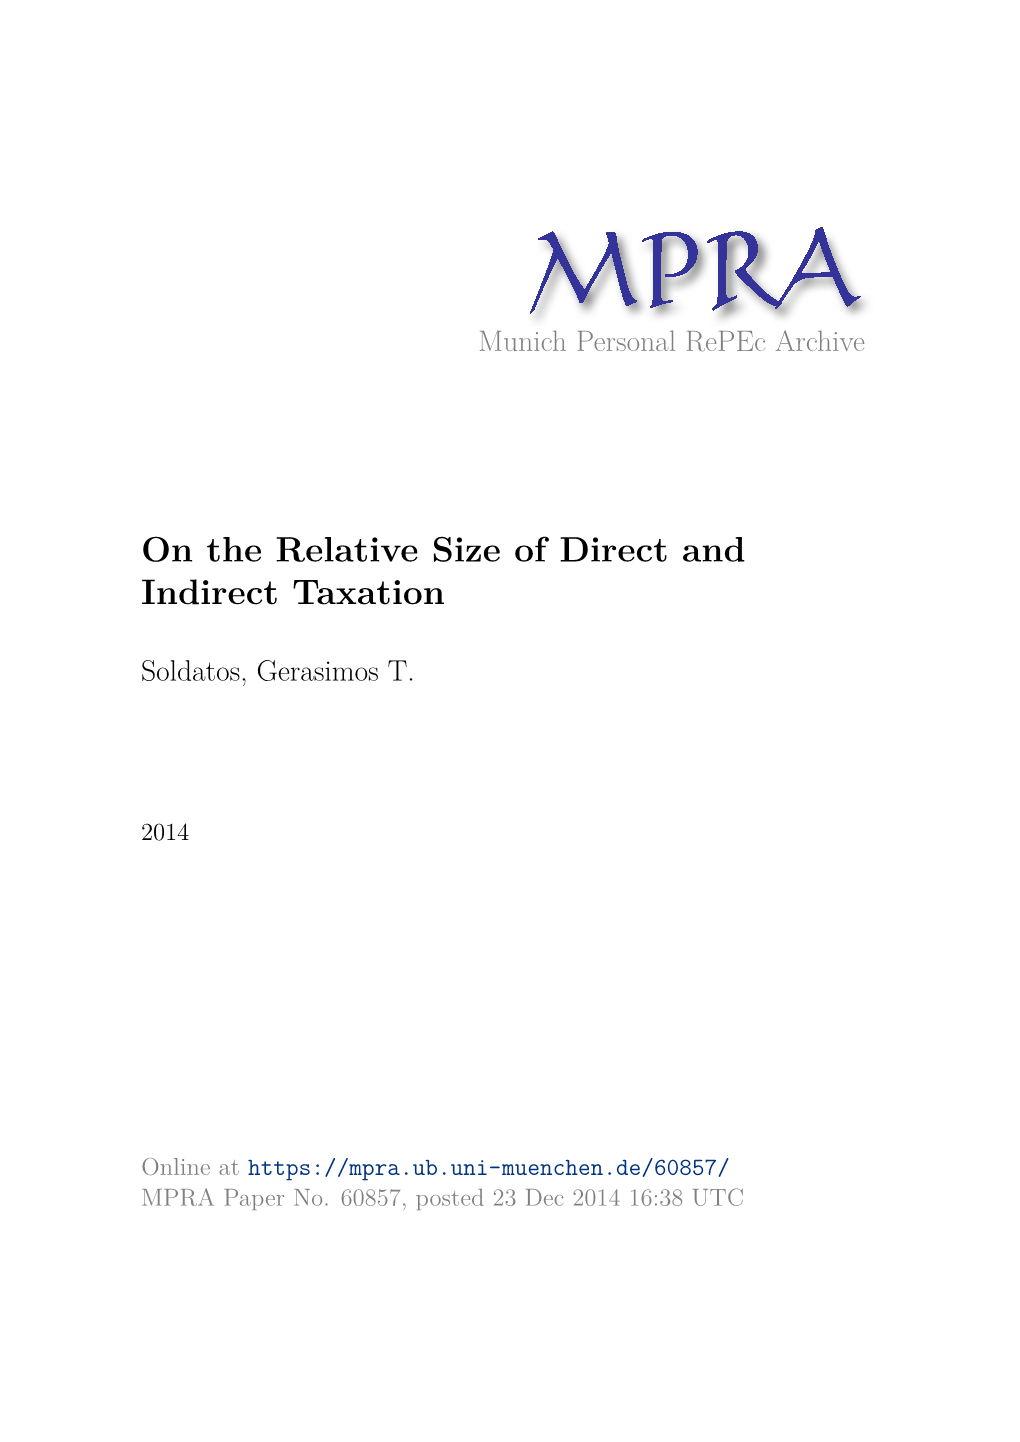 On the Relative Size of Direct and Indirect Taxation